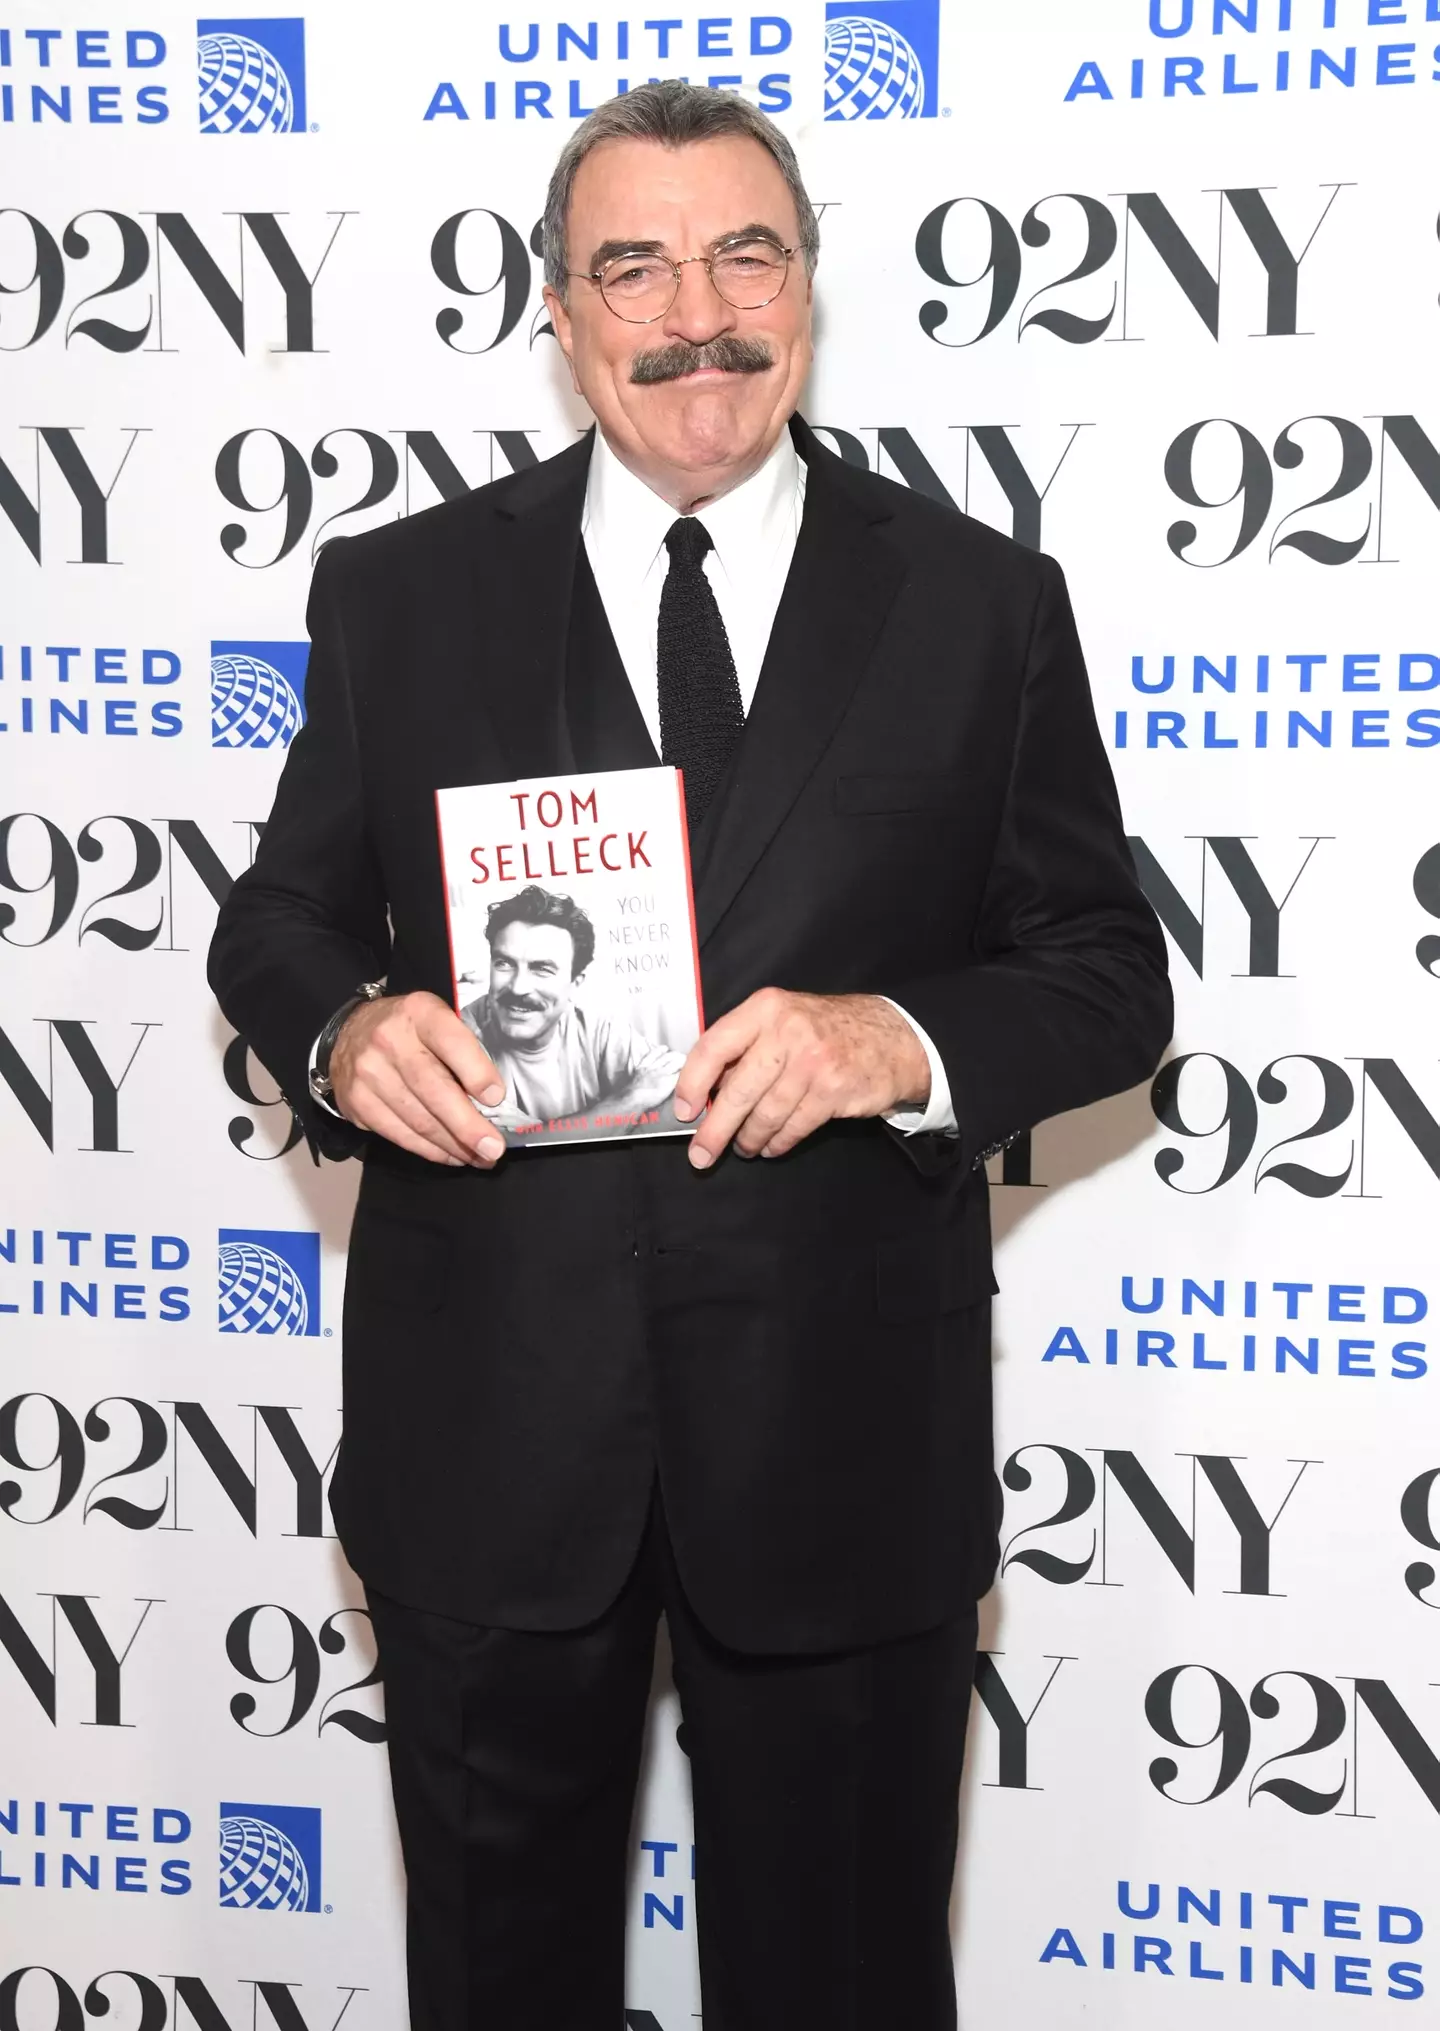 Selleck details the alleged incident in his memoir (Gary Gershoff/Getty Images) 